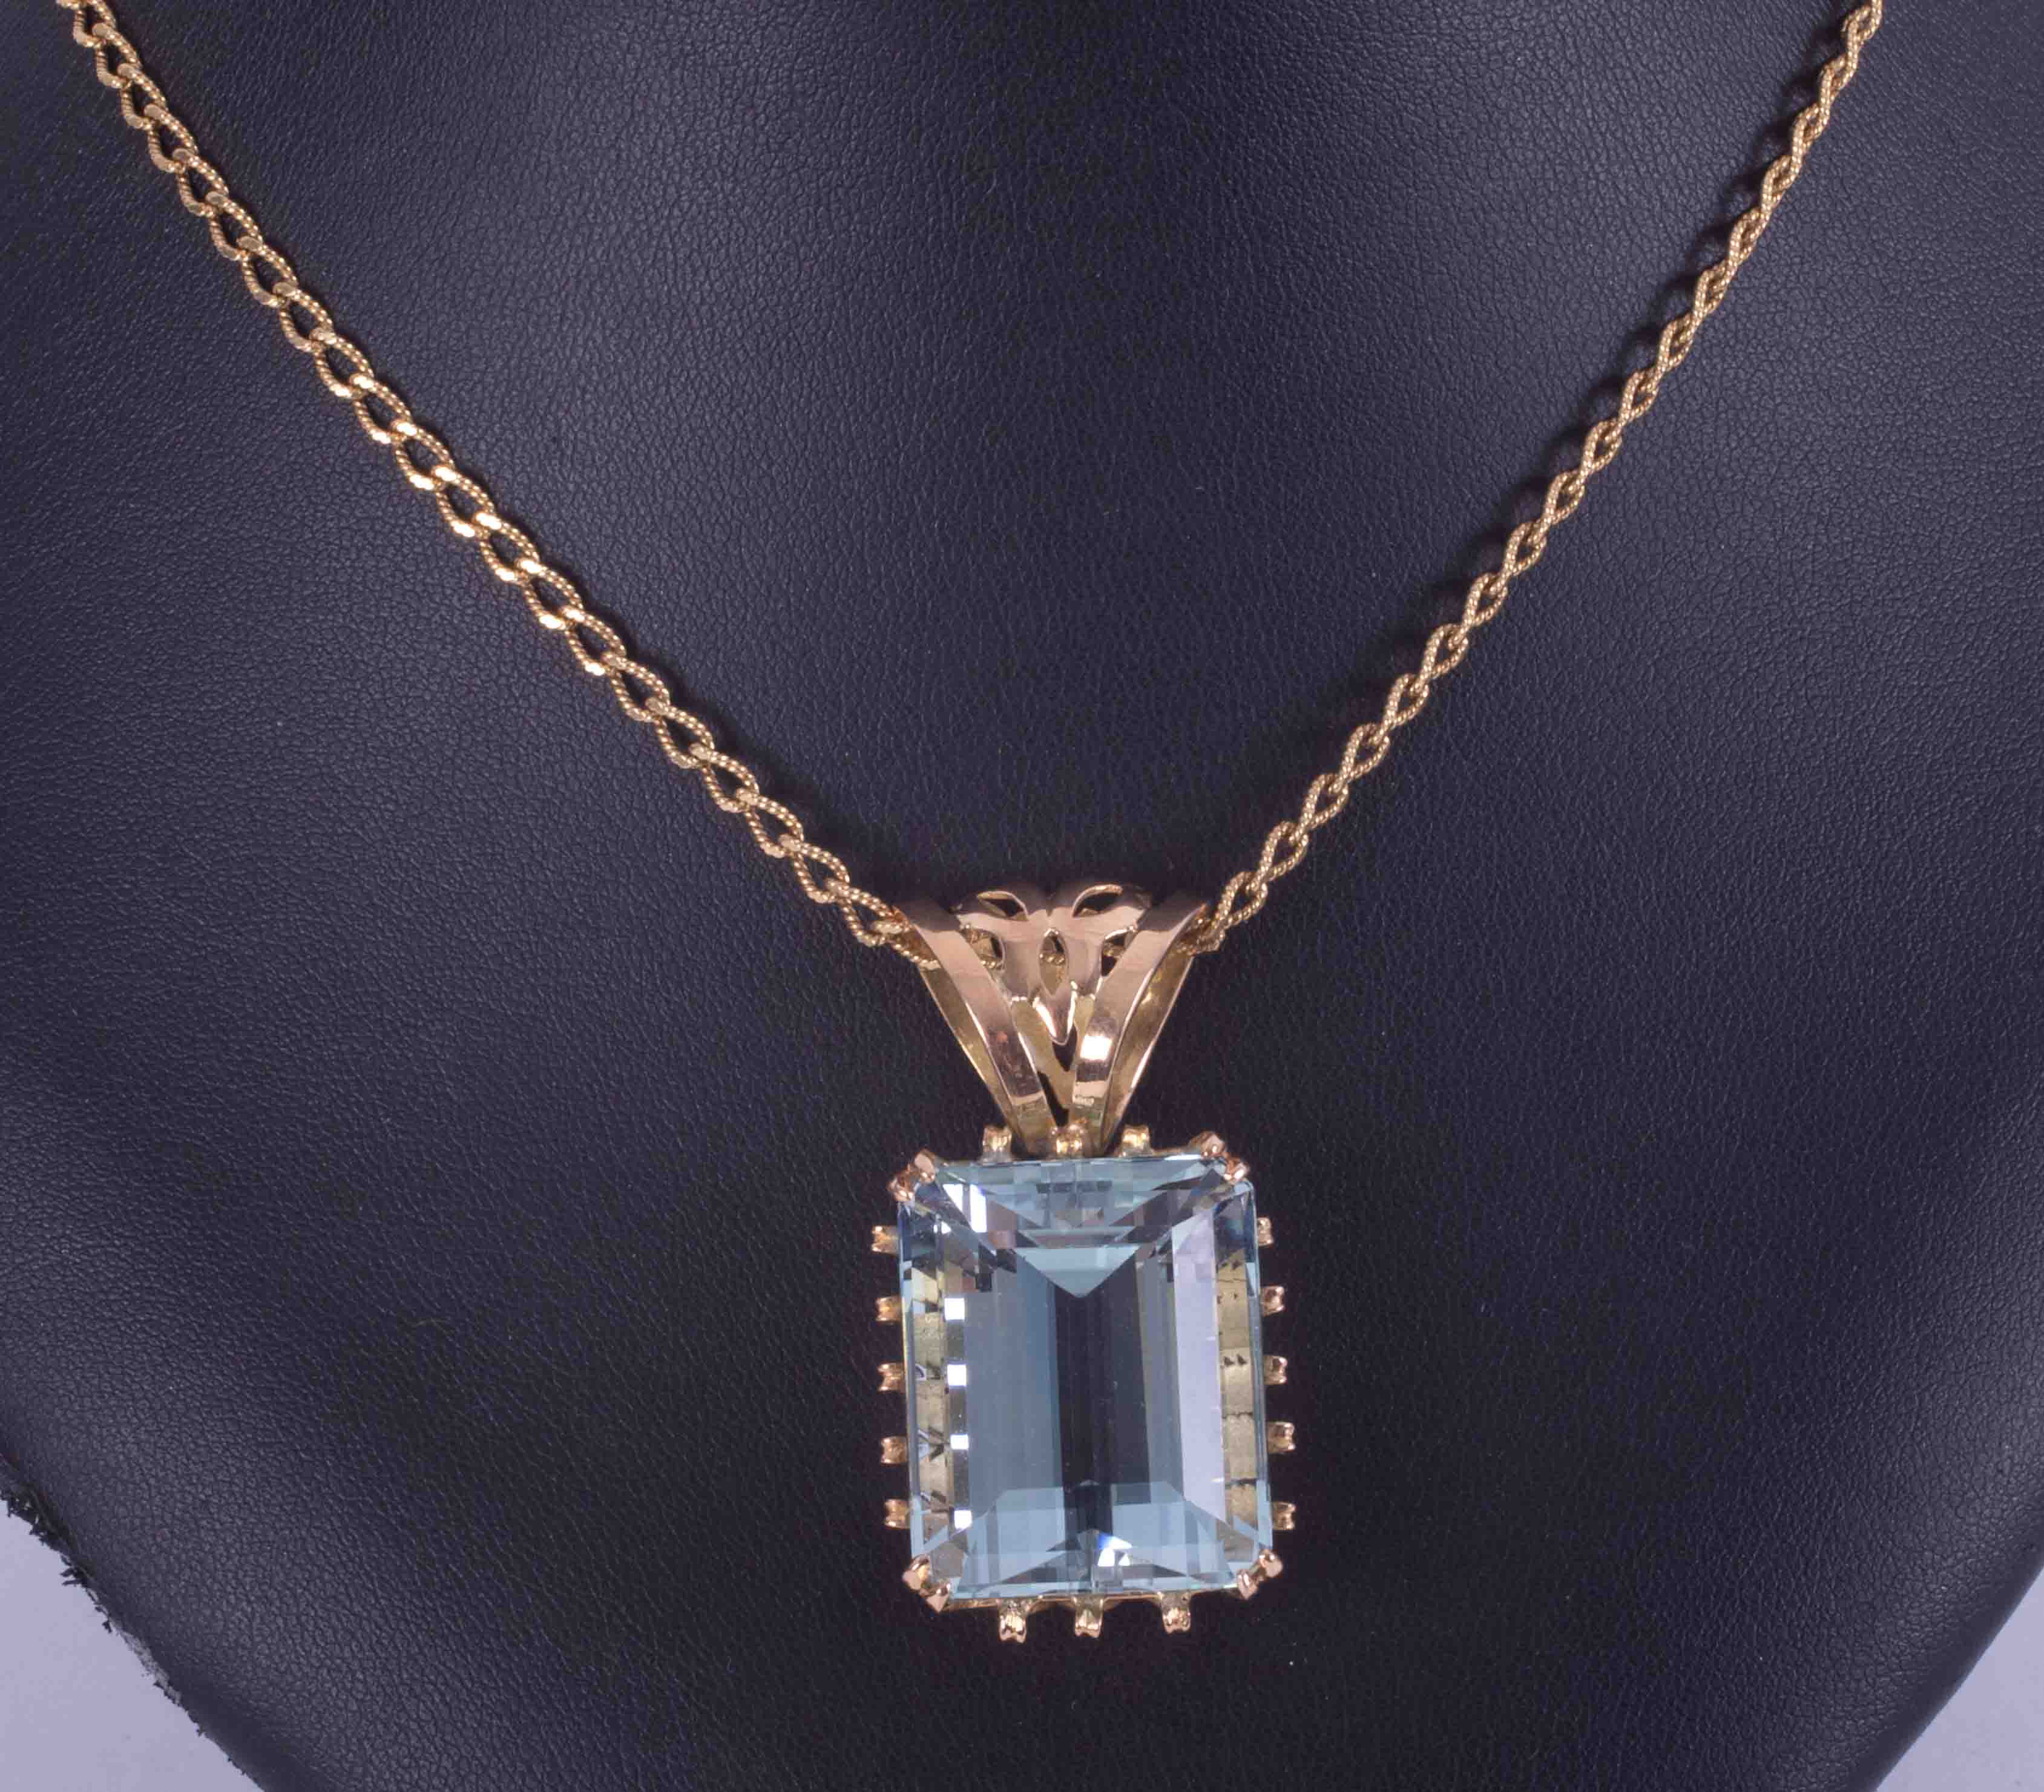 An impressive & ornate 18ct yellow gold pendant set approx. 30 carats of emerald cut Aquamarine with - Image 2 of 2